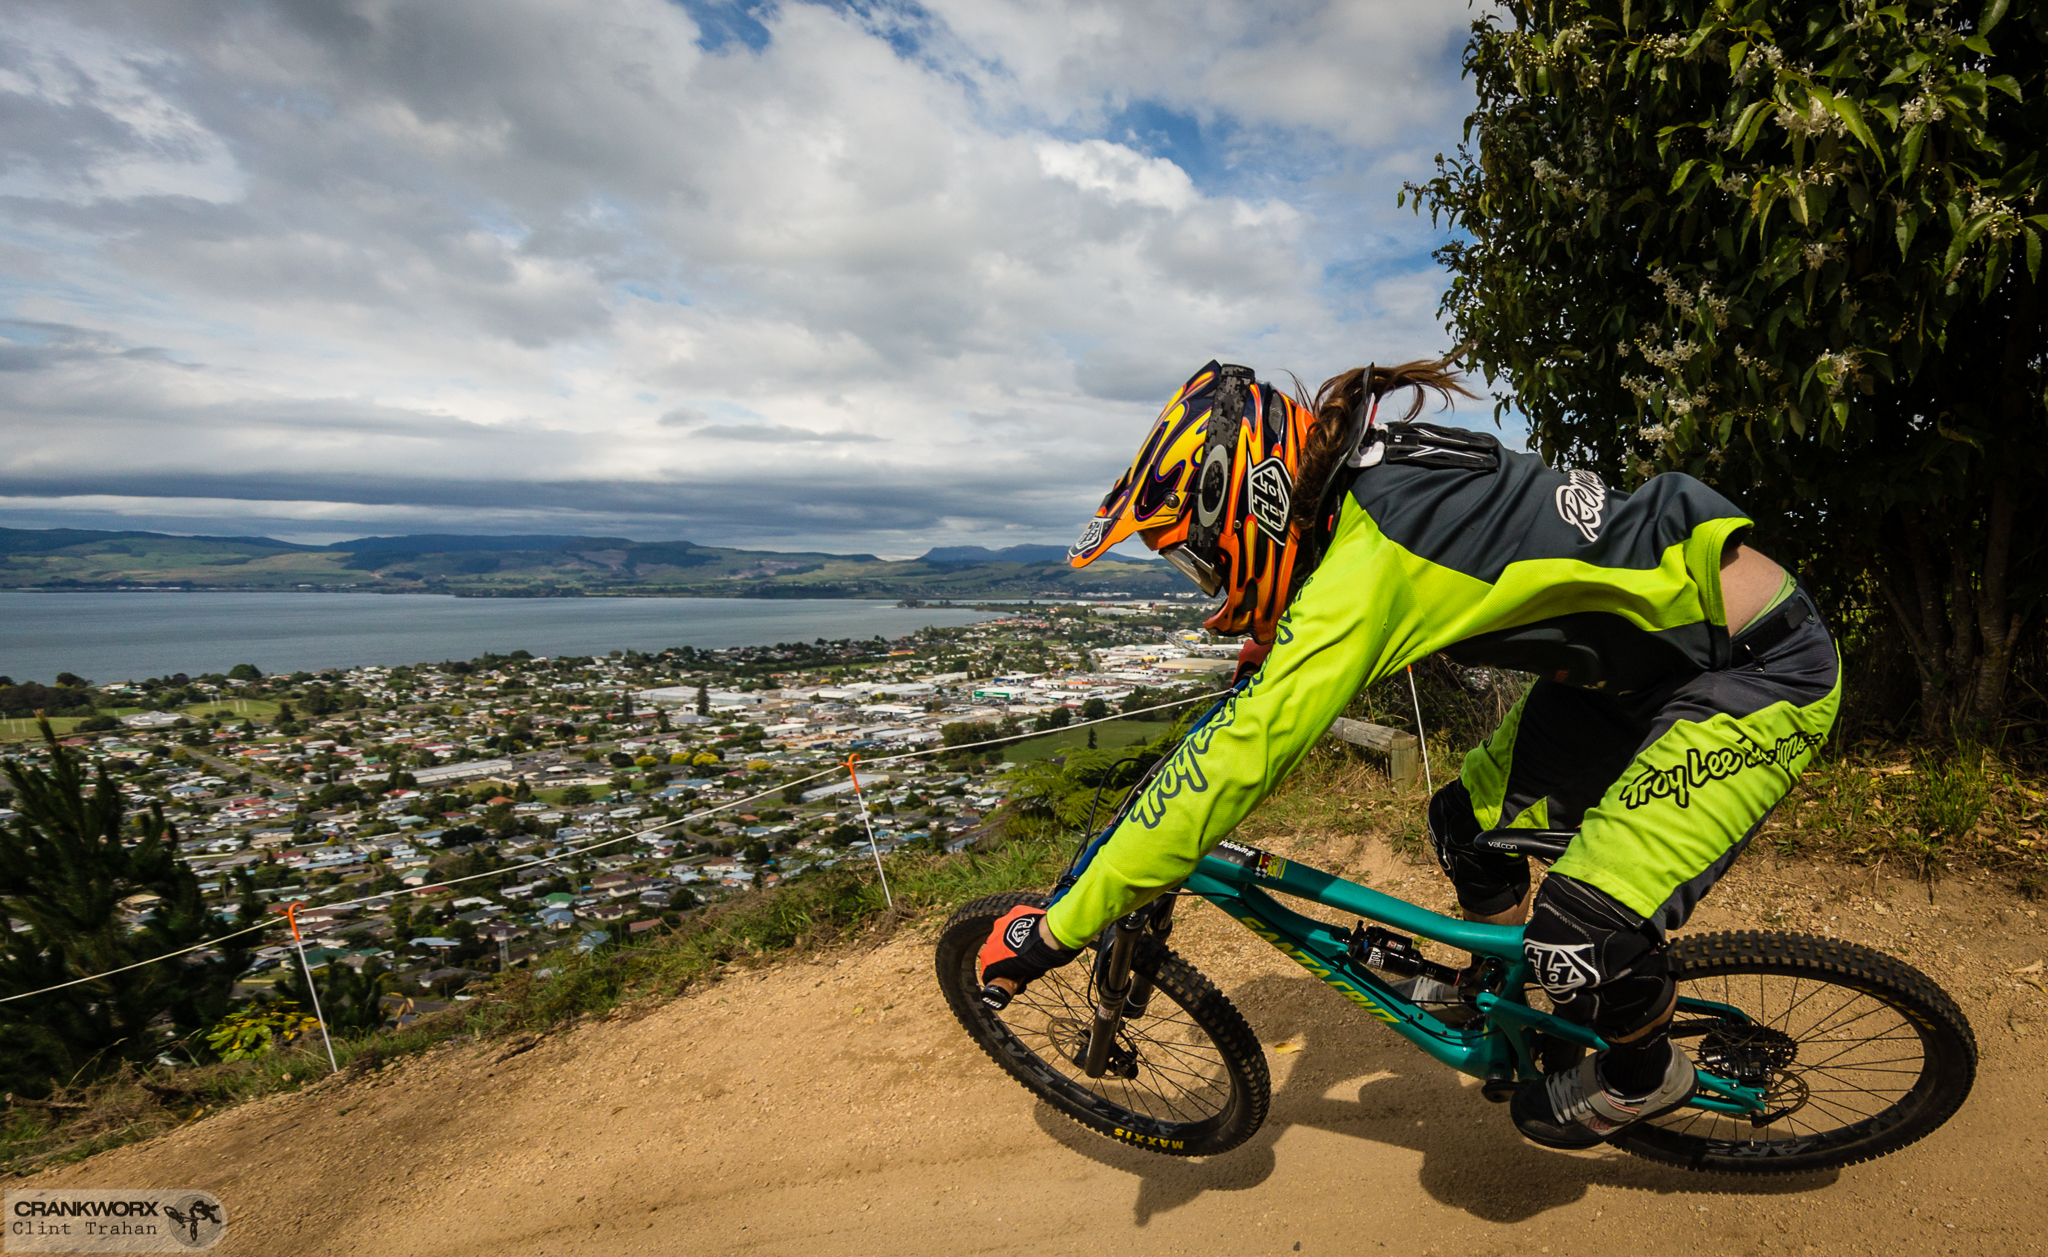 Rotorua premiered its Air DH in 2016, pushing a new Crankworx-wide race series into the realm of possibility